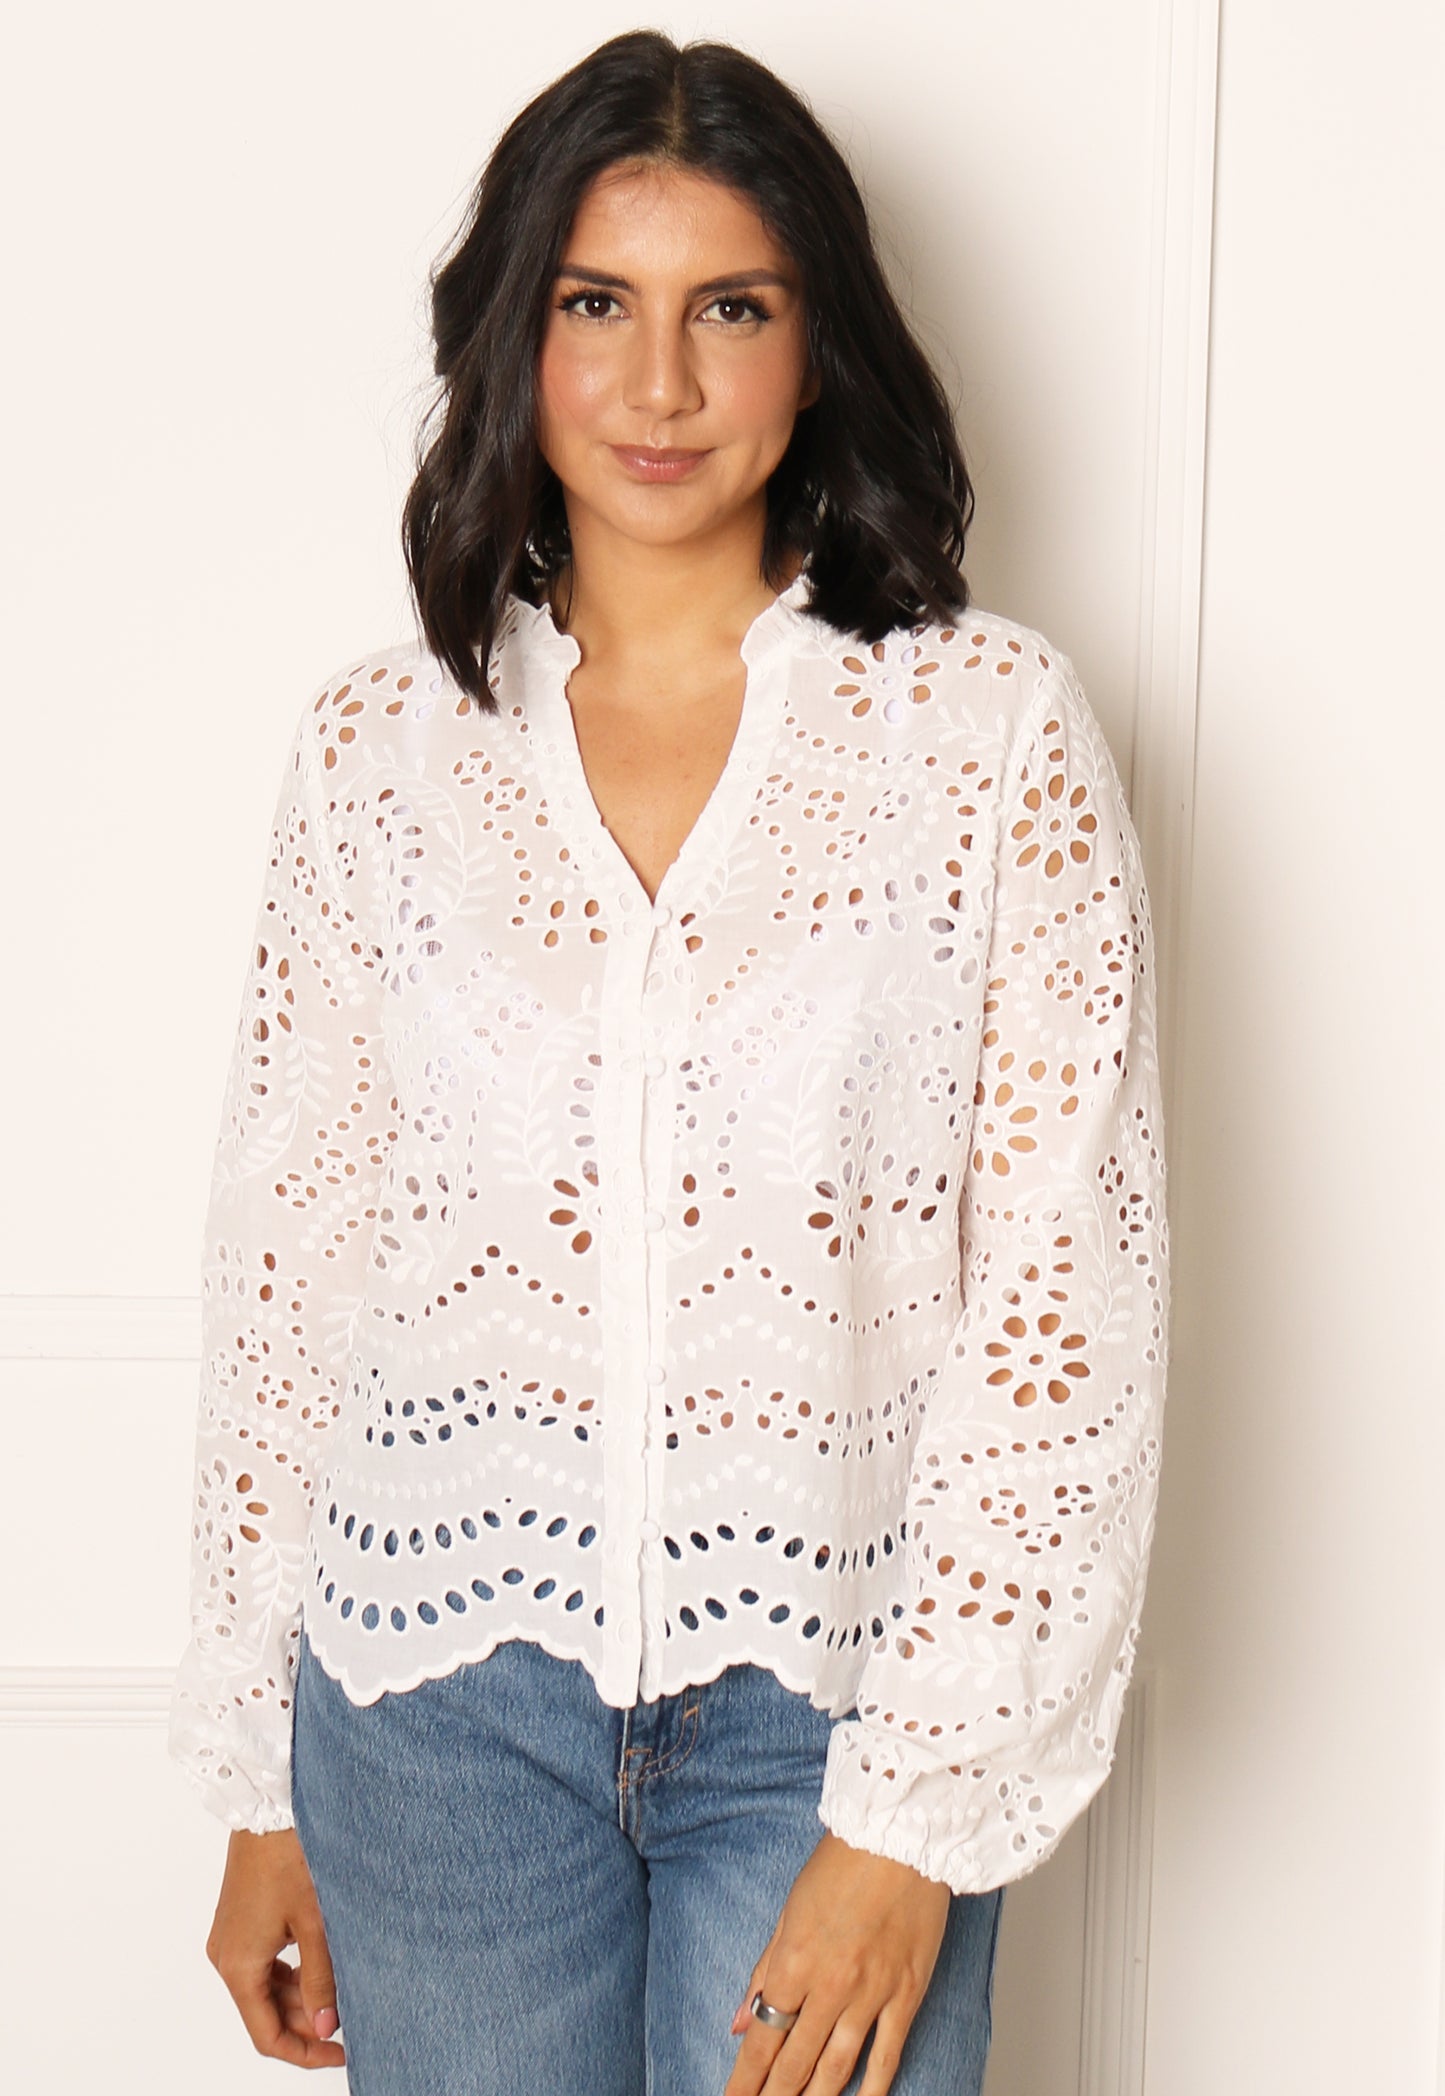 ONLY Lalisa Broderie Anglaise Lace Long Sleeve Blouse Shirt in White - One Nation Clothing